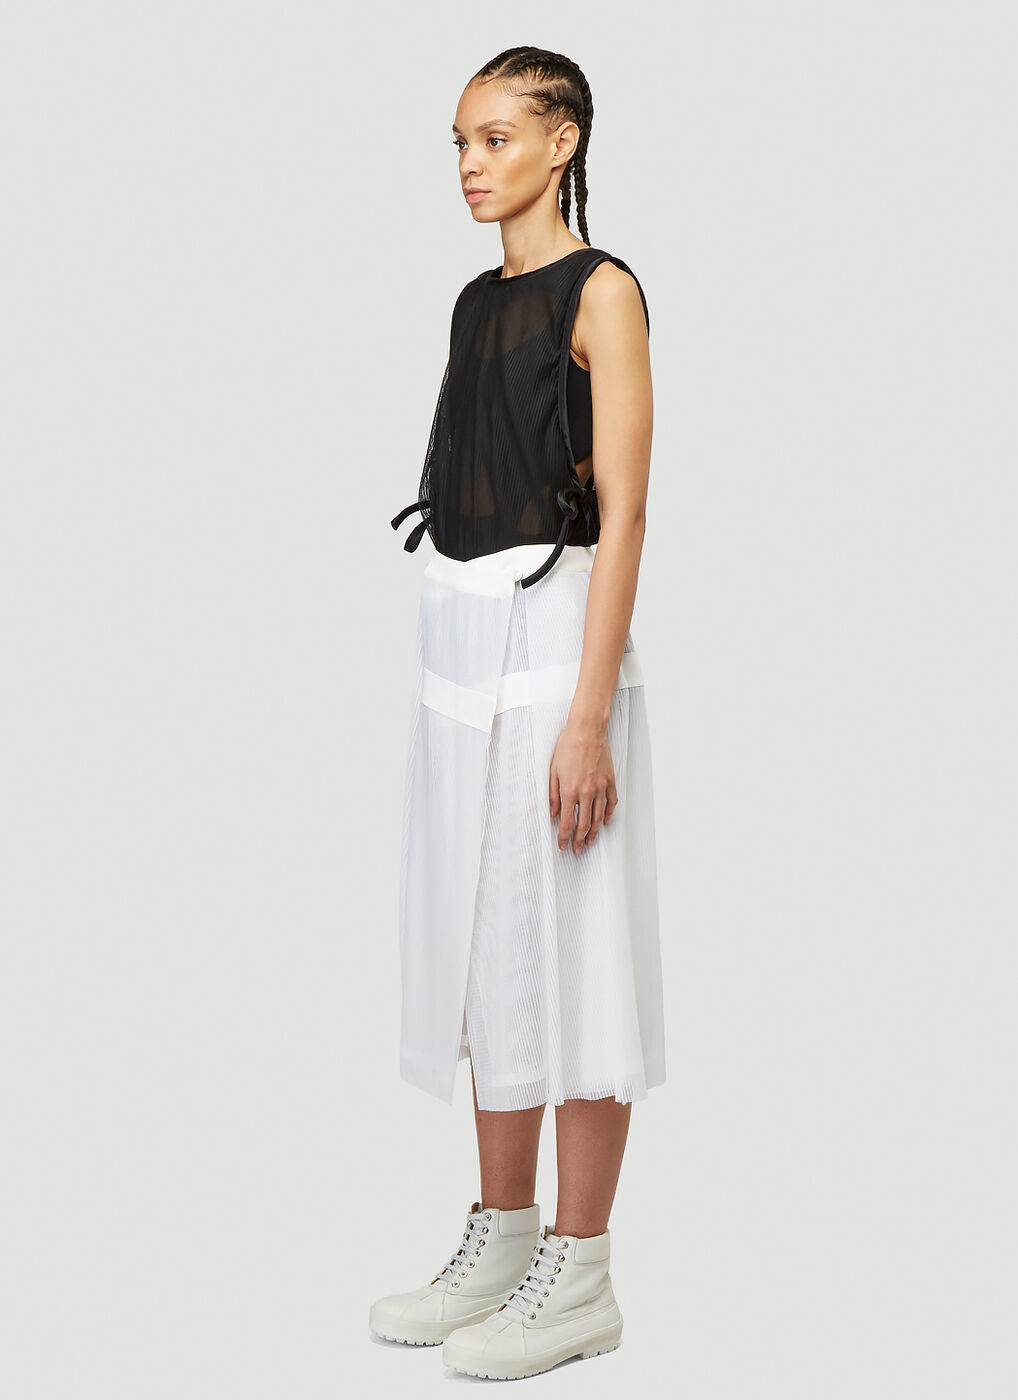 Pleated Wrap Skirt in White